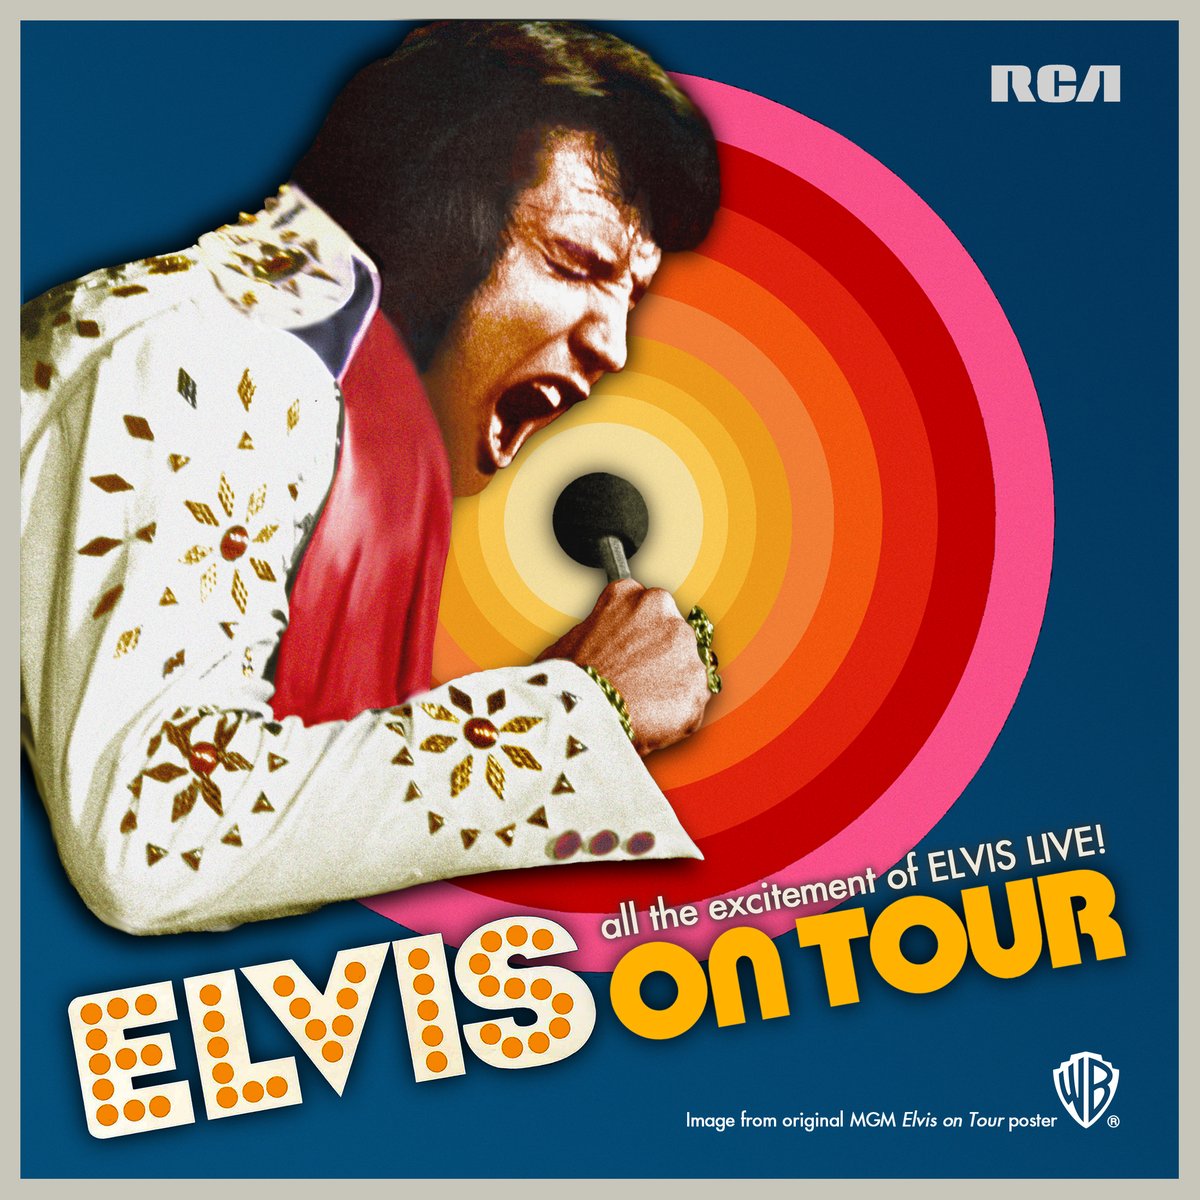 Join The King of Rock'N'Roll as he journeys through his iconic 1972 tour across North America with Elvis on Tour and hear never-before-heard live recordings of classic hits you know and love. #ElvisPresley Available now on all digital platforms: elvis.lnk.to/EOT